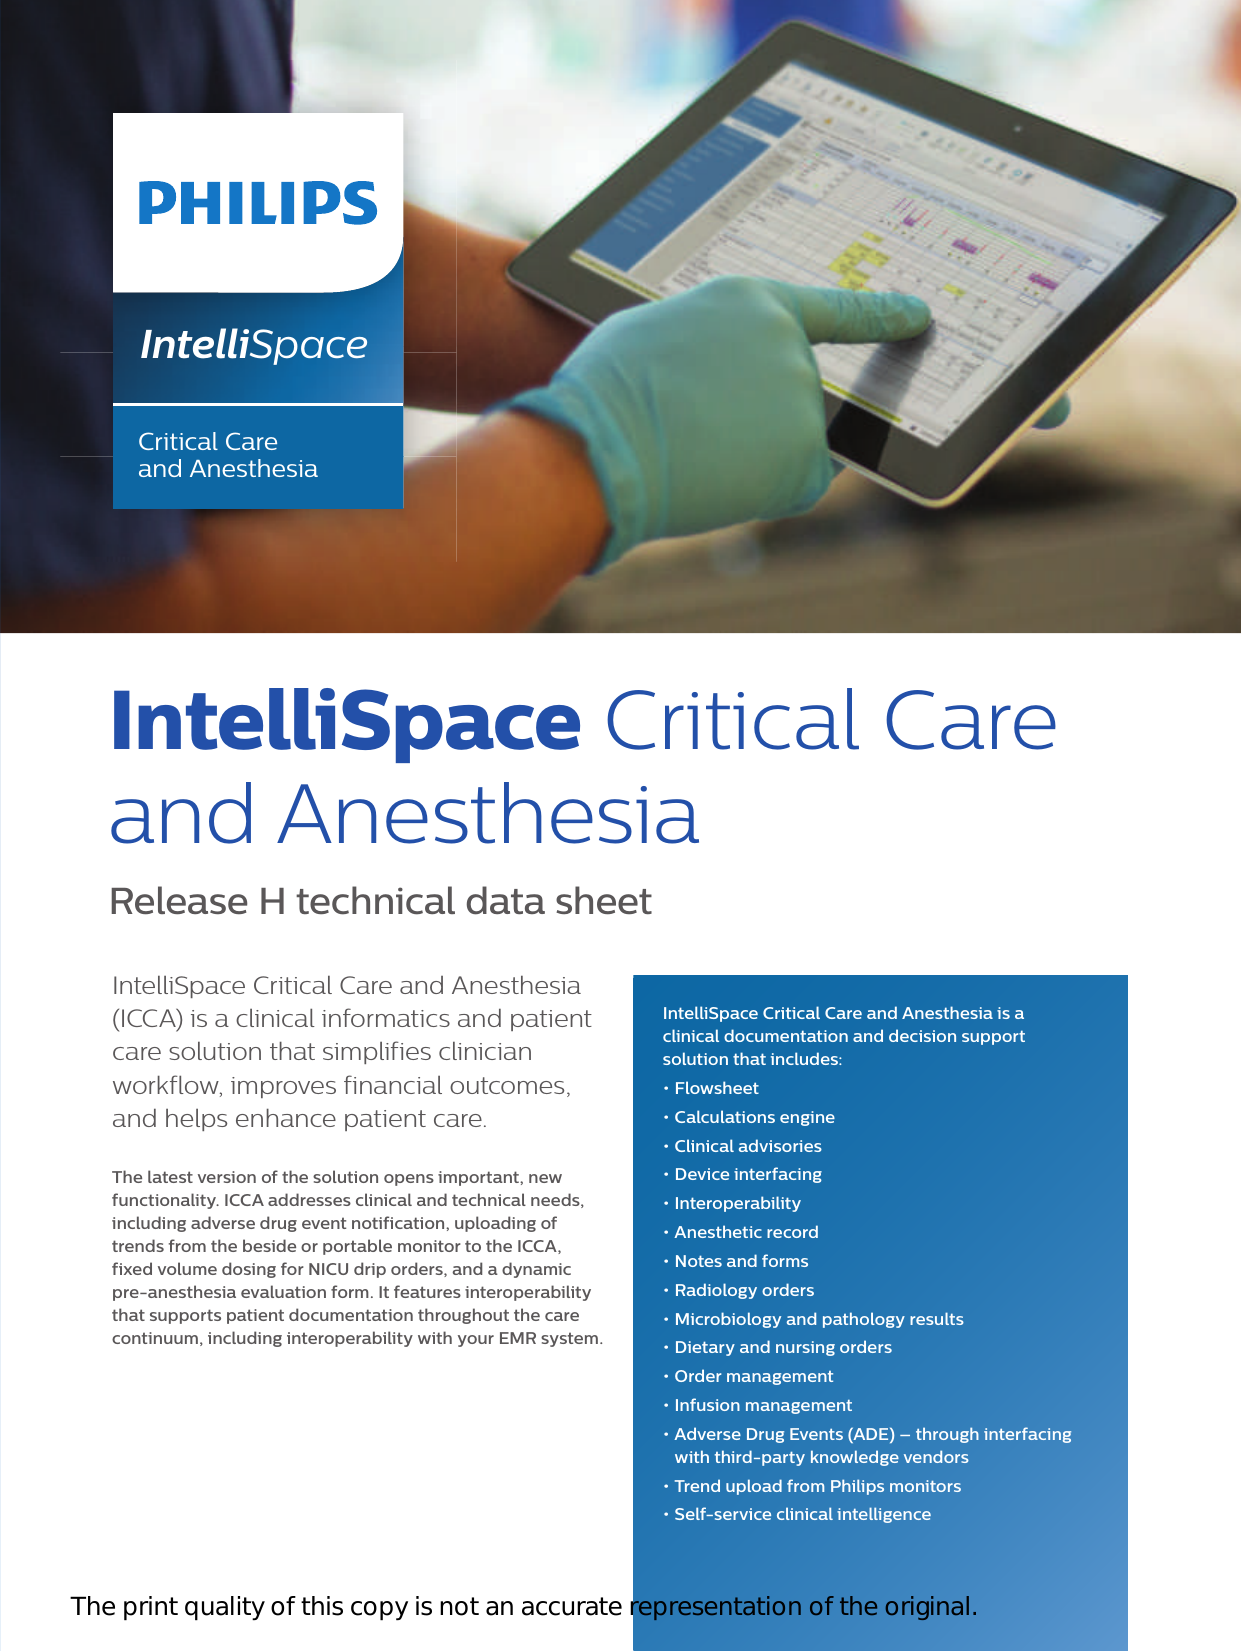 Page 1 of 4 - Philips NOCTN332 452299109771 User Manual Intelli Space Critical Care And Anesthesia ICCA Data Sheet